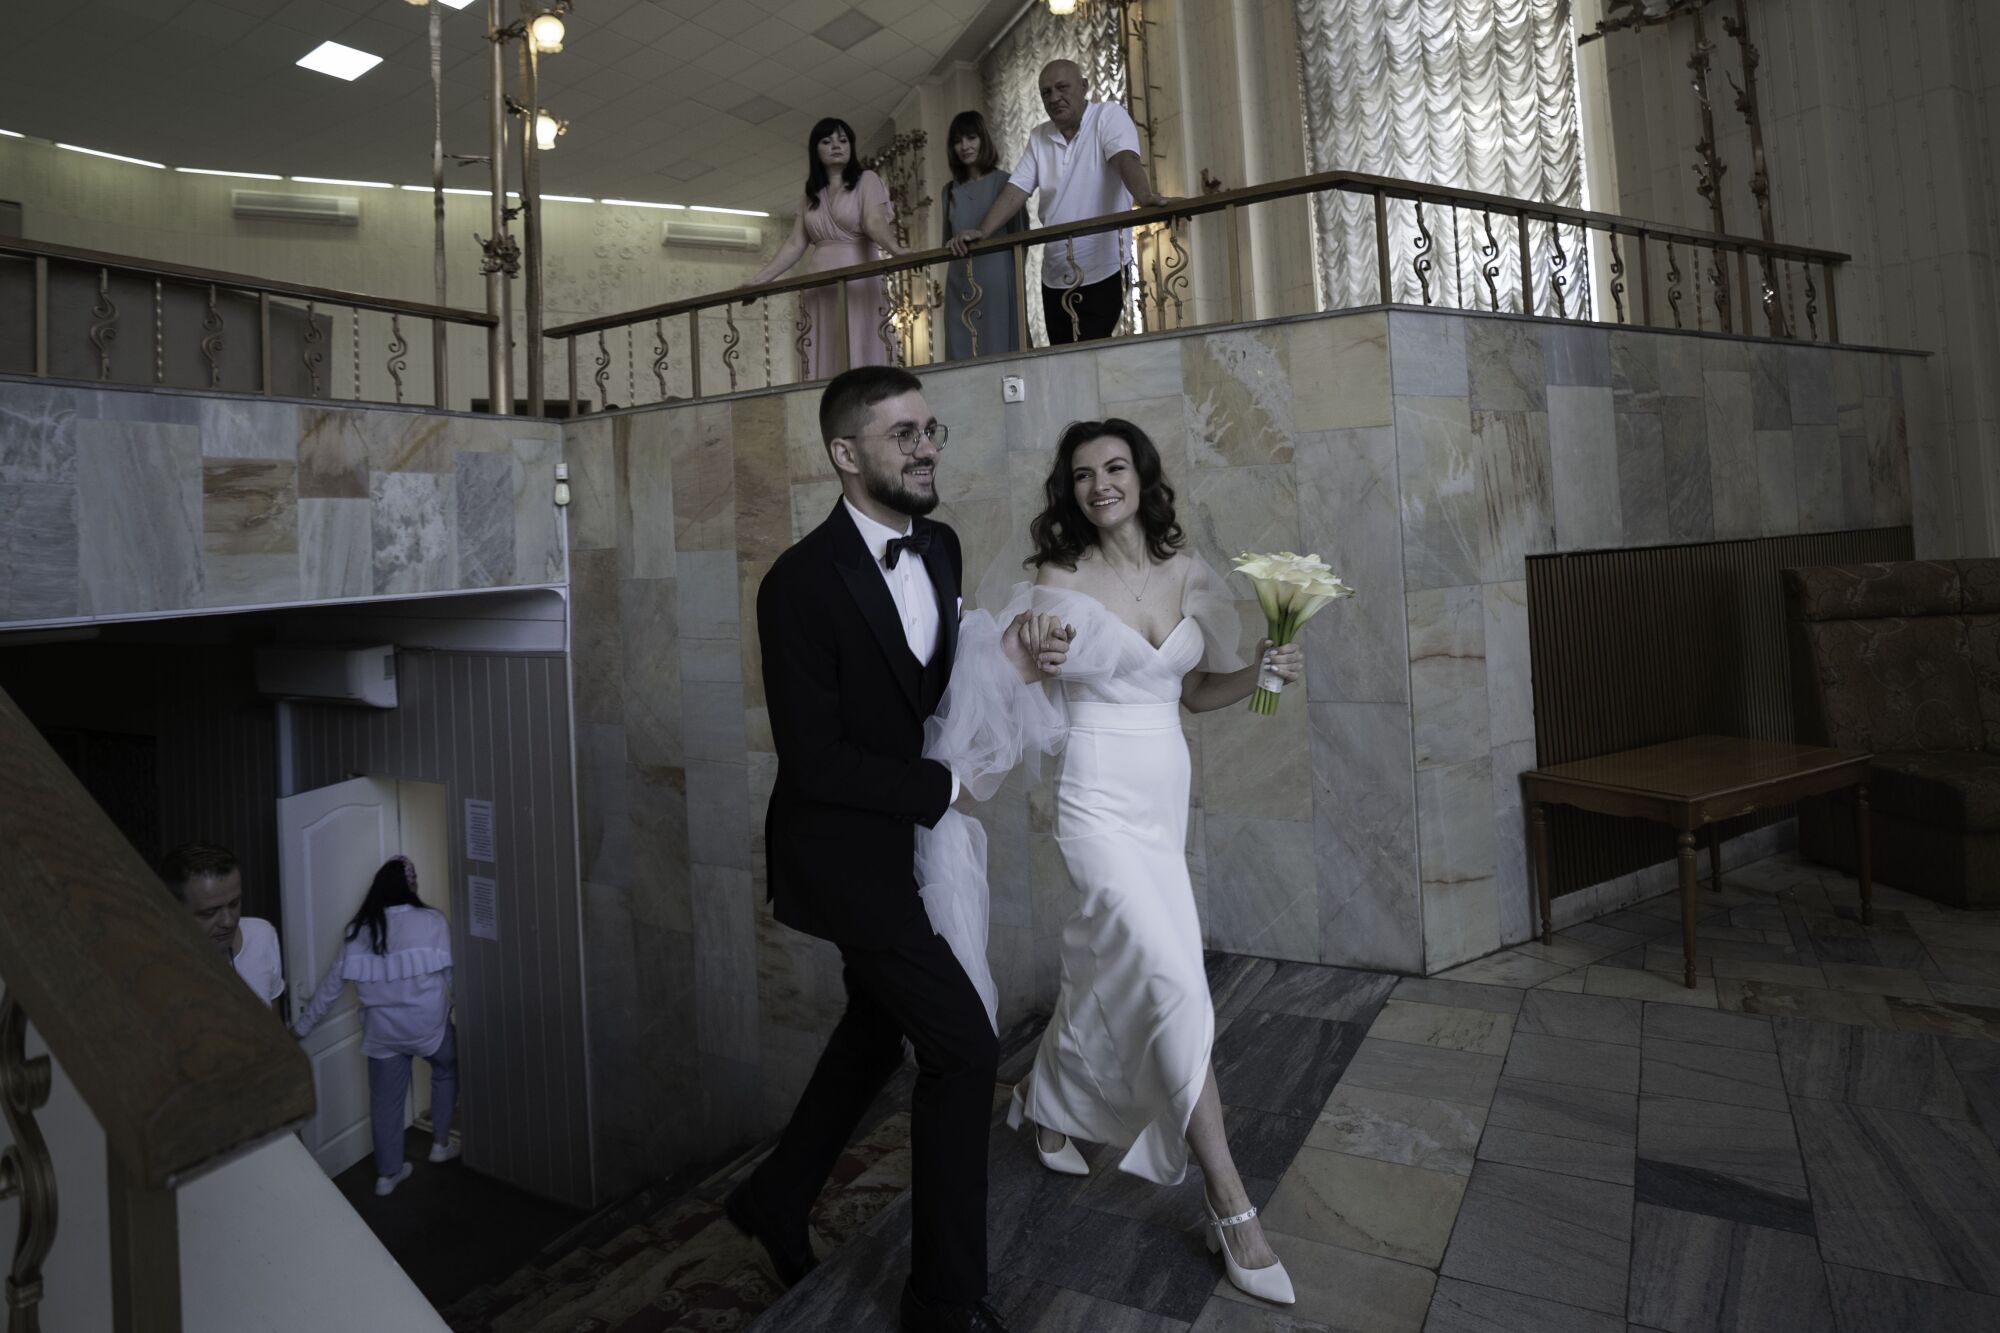 A smiling bride and groom walk to a hall